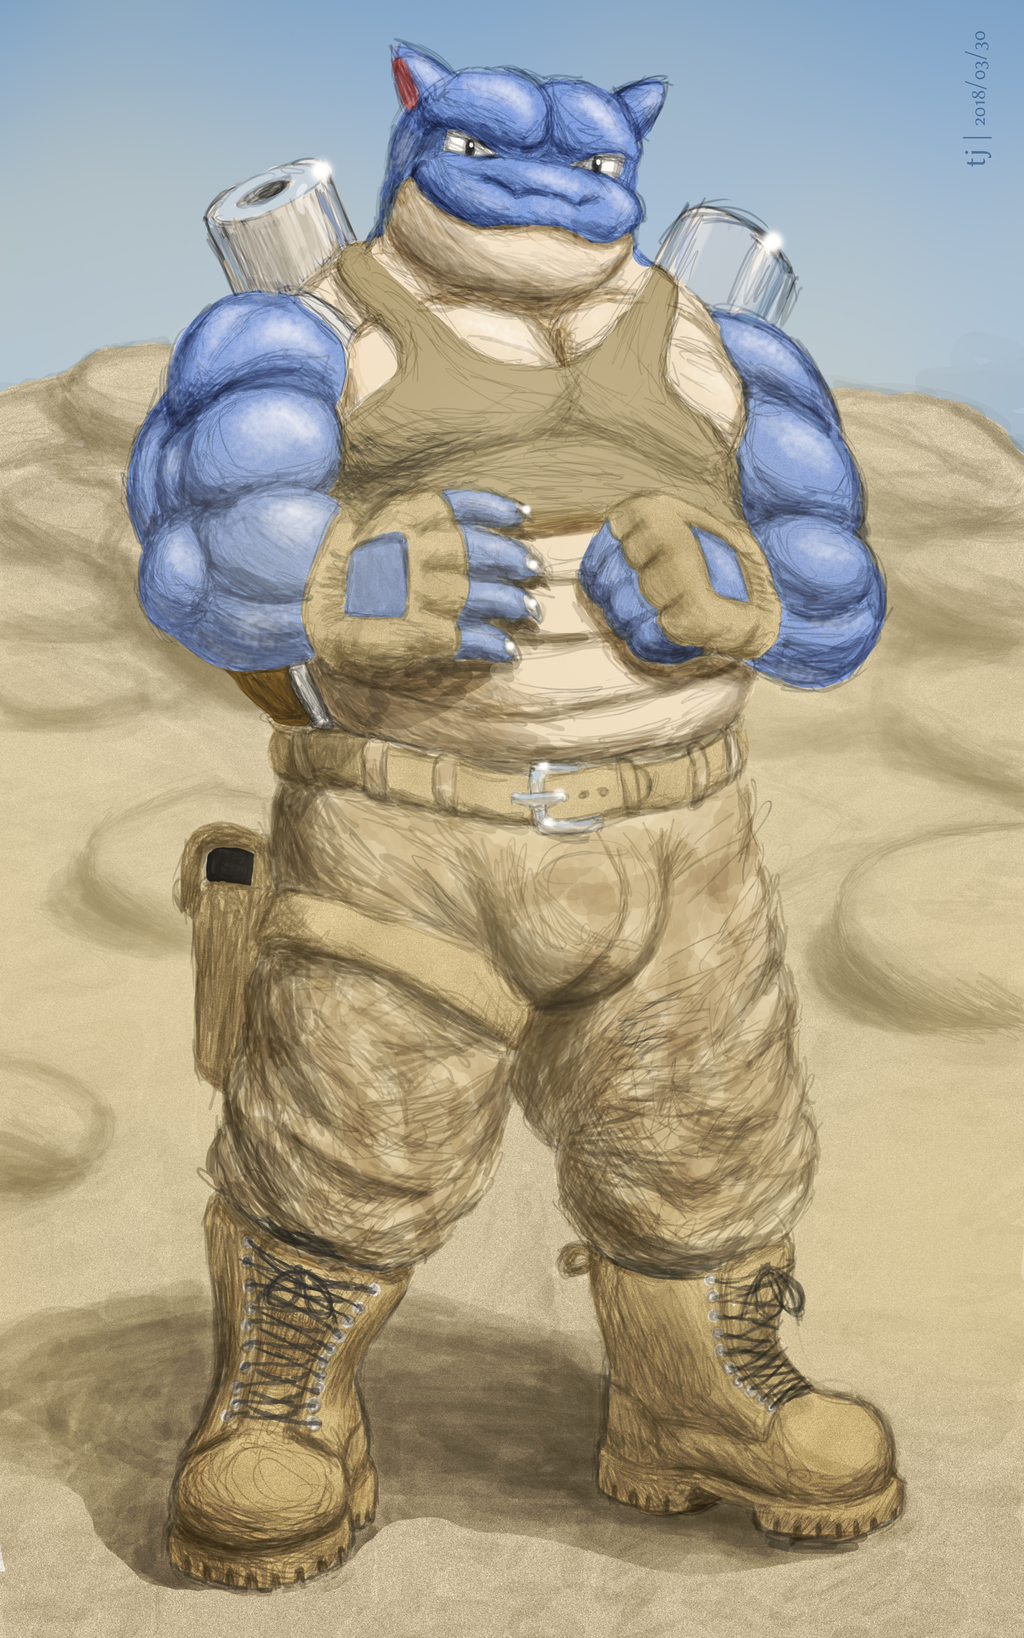 Most recent image: [Commission] Brox the Blastoise - Colored Sketch